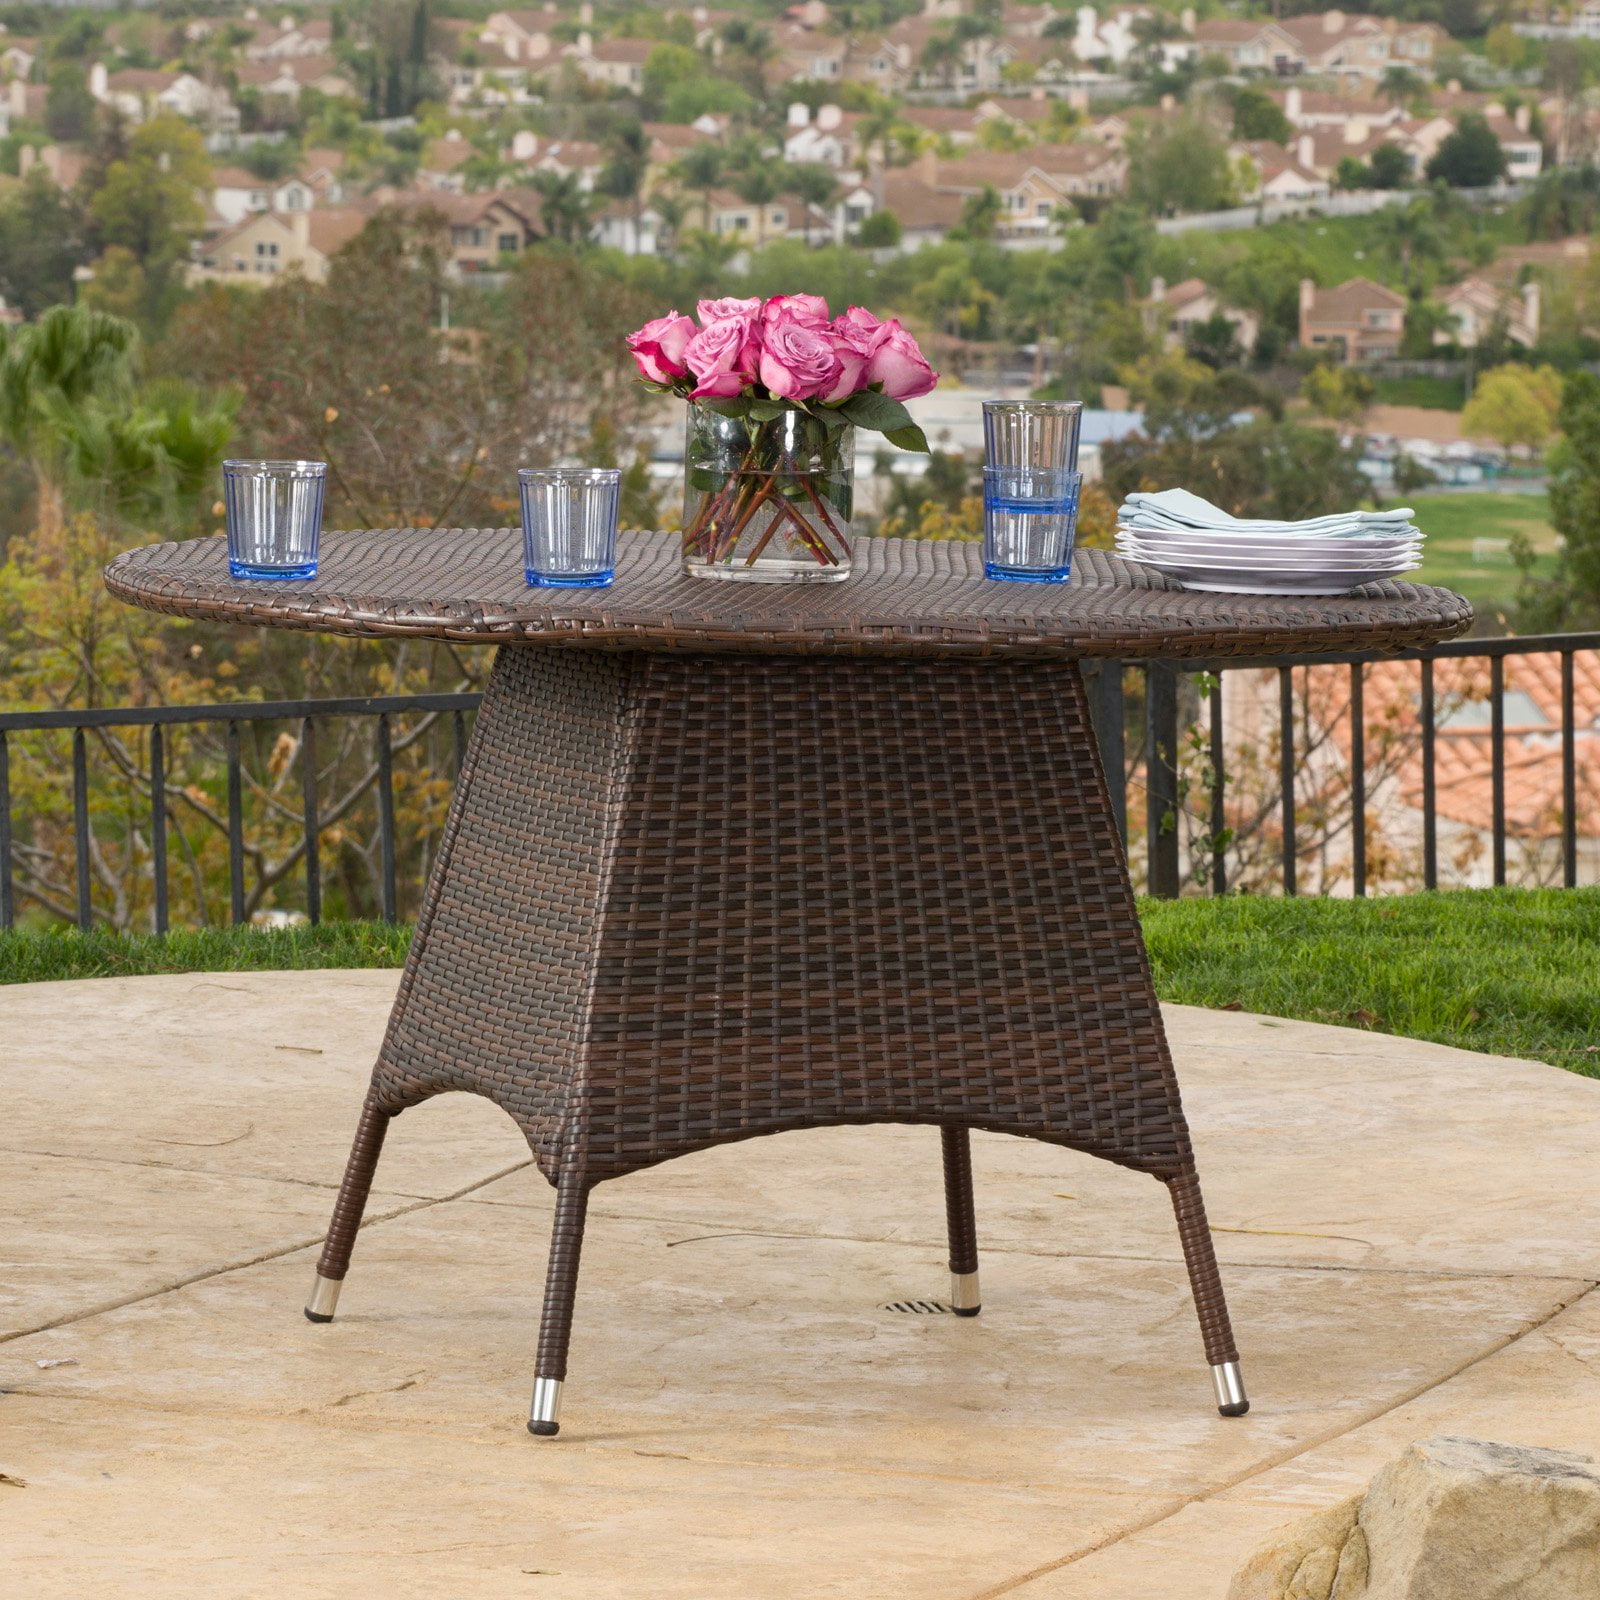 Round Outdoor Dining Table For 8